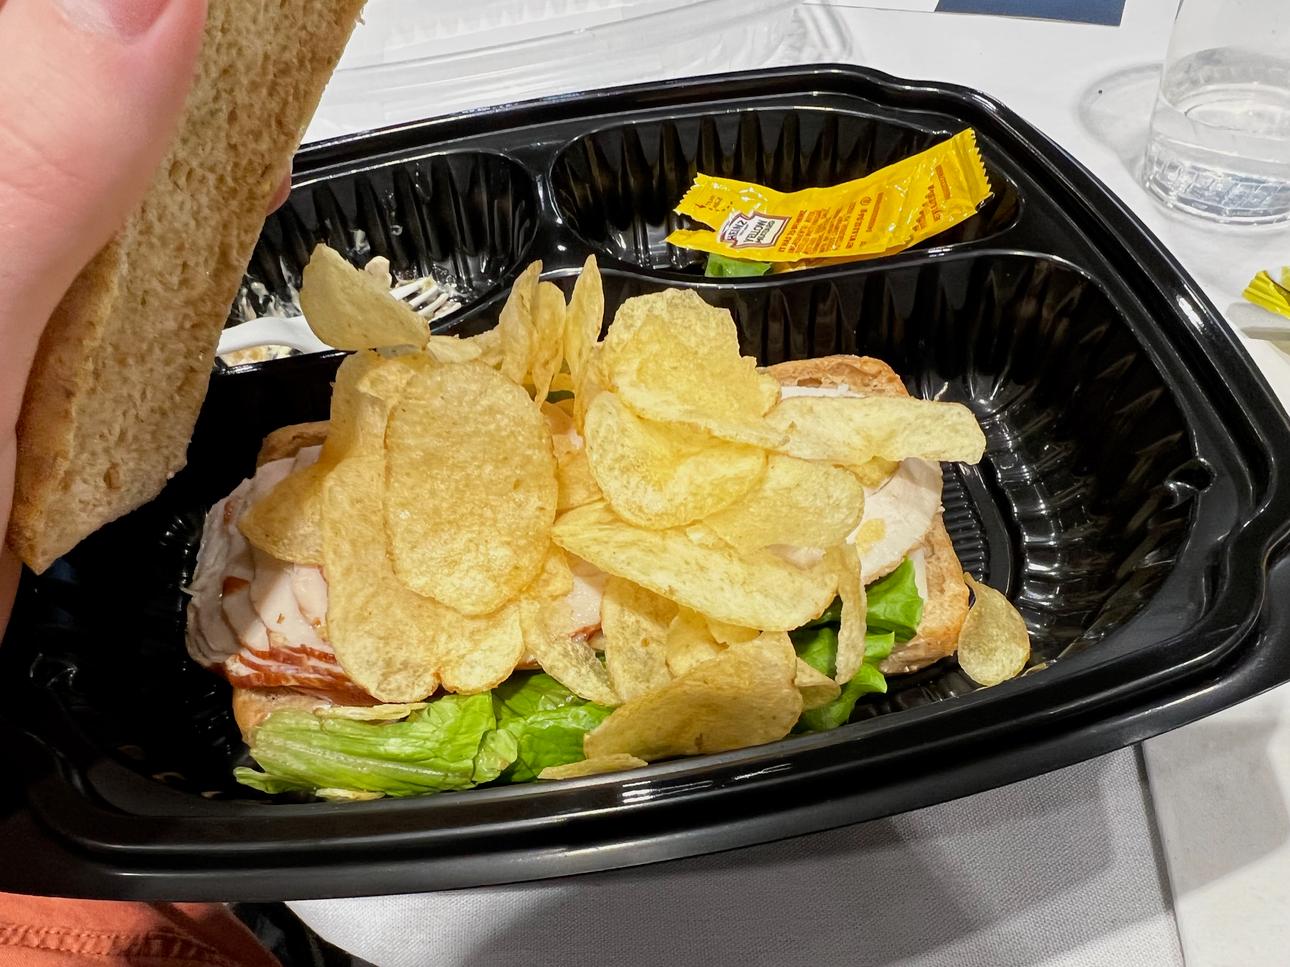 A picture of a ham sandwich with some chips tossed on top of the ham.